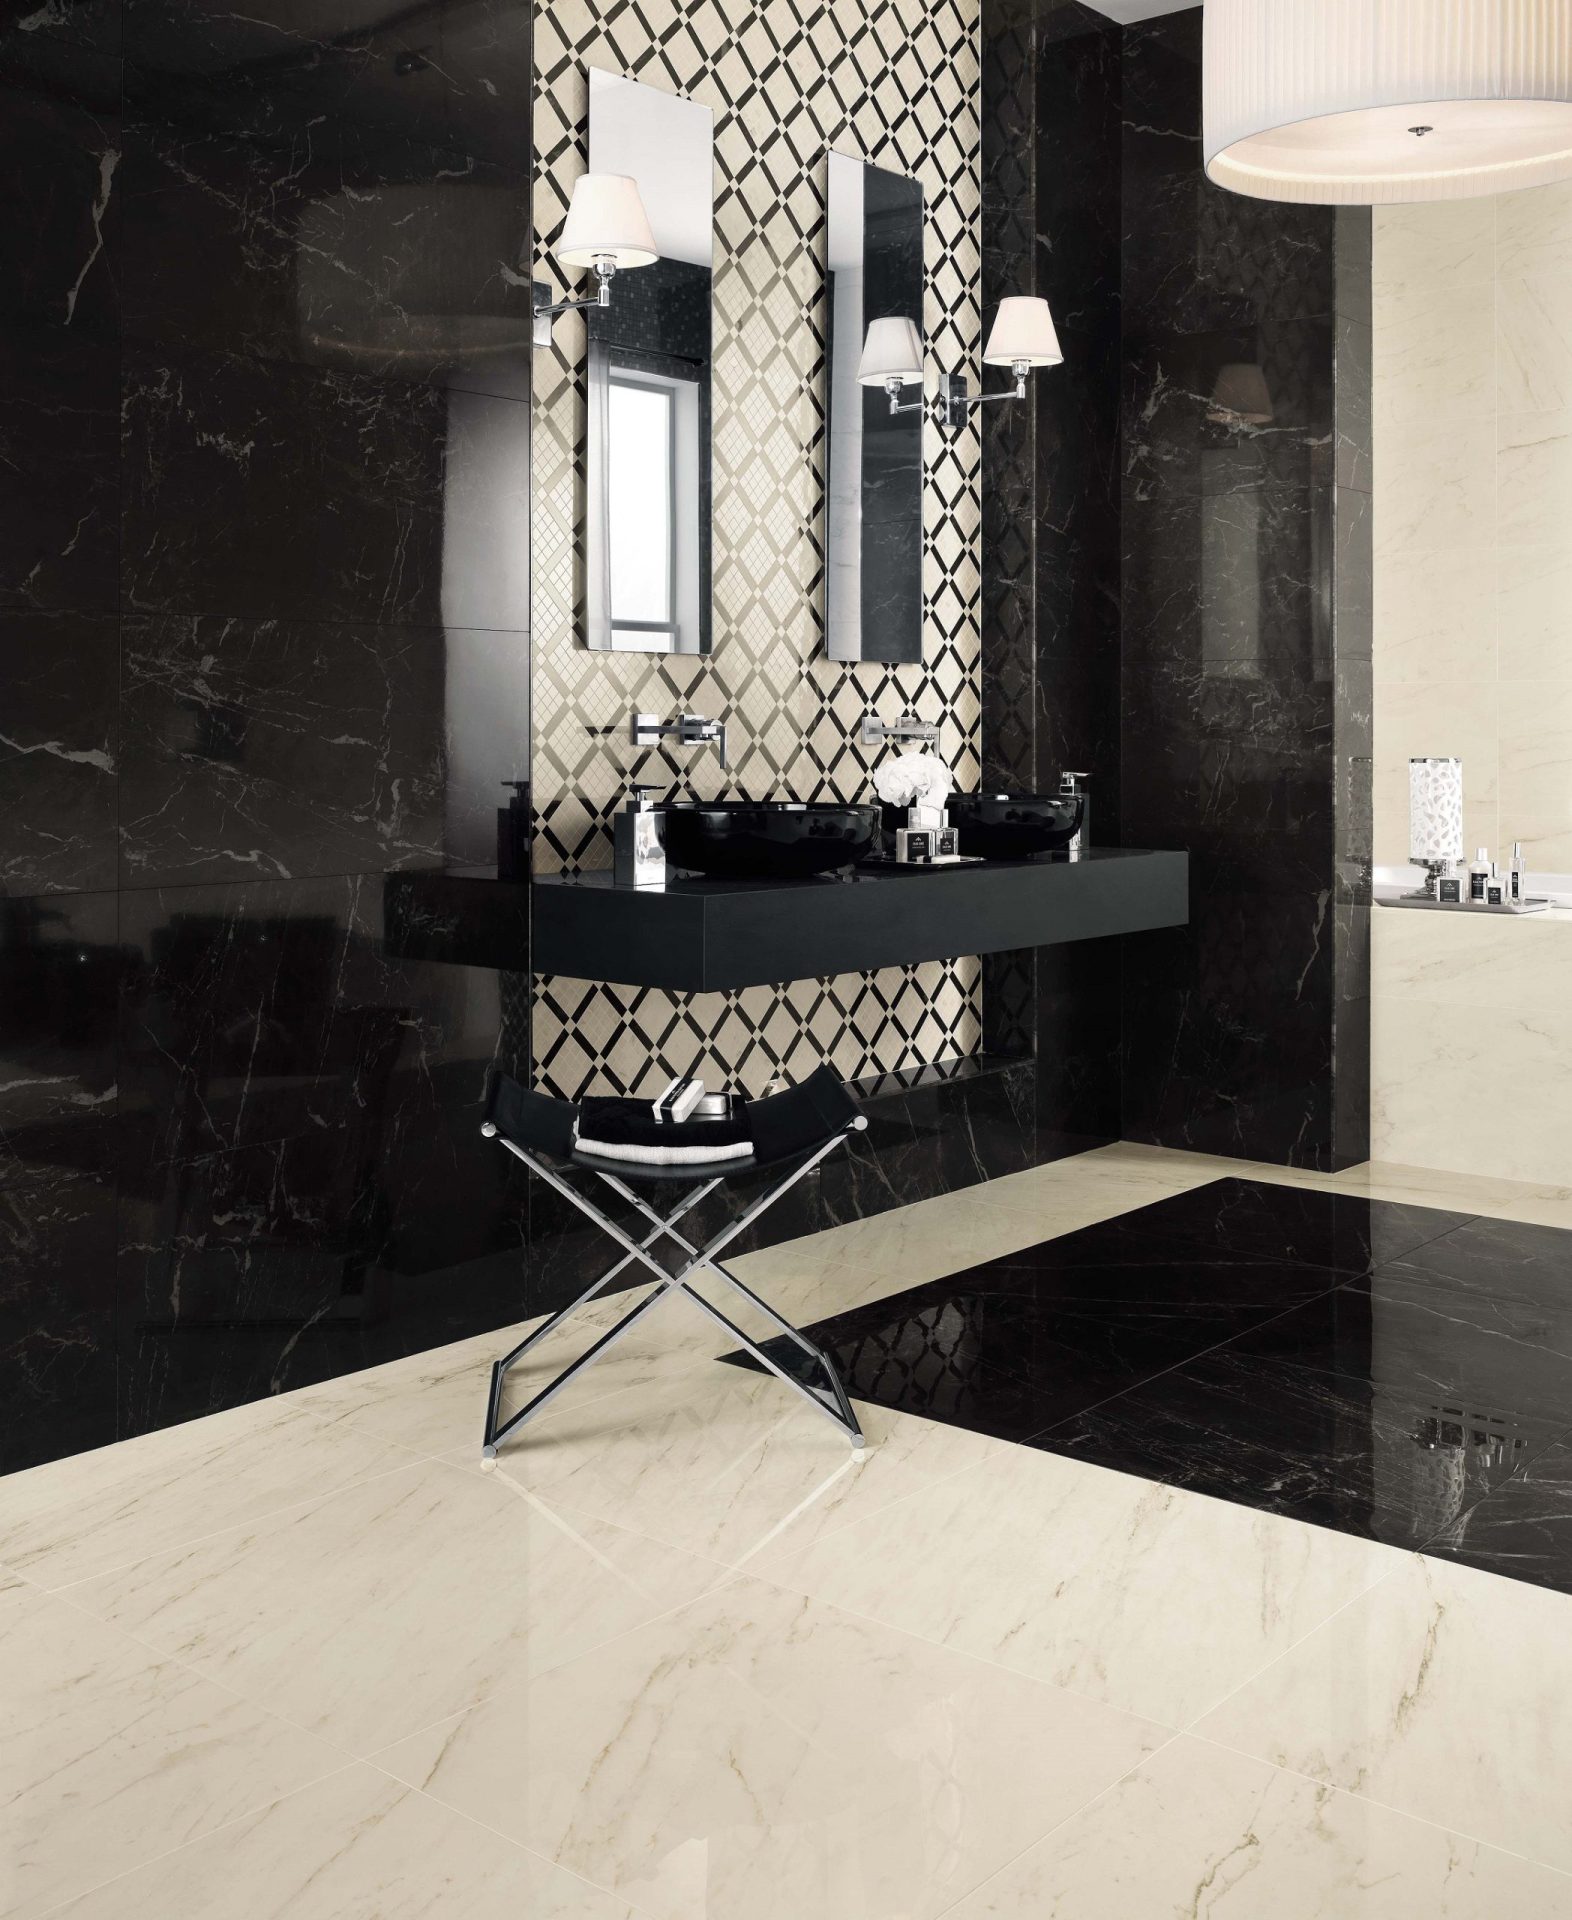 Marvel Pro Statuario Select tile on floors and Noir St. Laurent tile on walls and area of floor under sink in public bathroom